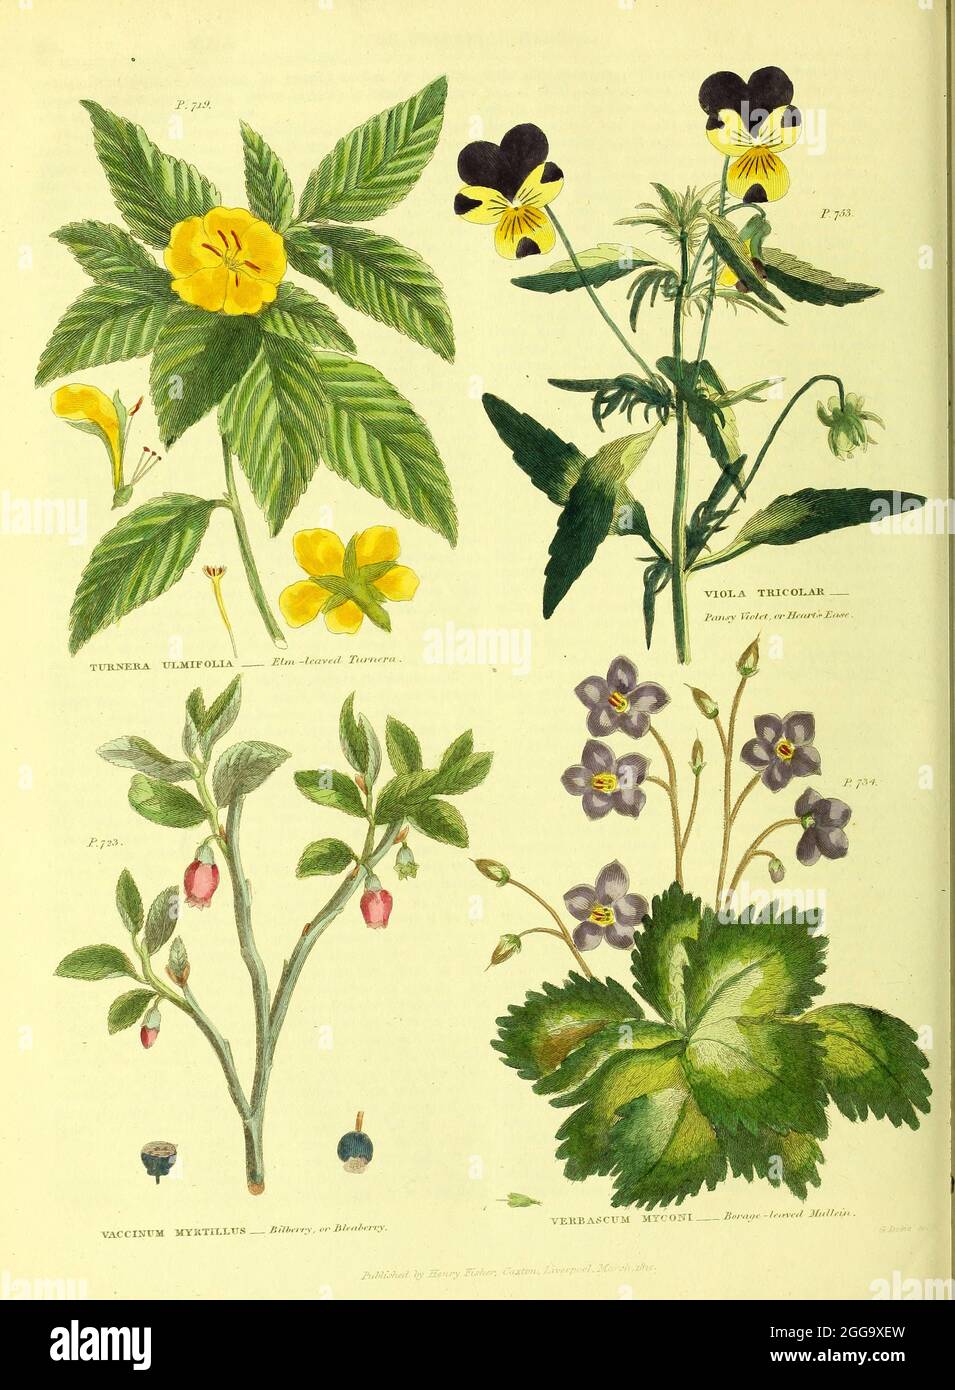 Turnera ulmifolia [Elm Leaved Turnera], Viola Tricolar [Pansy Violet or Heart's Ease], Vaccinum myrtillus [Bilberry or bleaberry] Verbascum myconi [Borage leaved Mullein] from Vol II of the book The universal herbal : or botanical, medical and agricultural dictionary : containing an account of all known plants in the world, arranged according to the Linnean system. Specifying the uses to which they are or may be applied By Thomas Green,  Published in 1816 by Nuttall, Fisher & Co. in Liverpool and Printed at the Caxton Press by H. Fisher Stock Photo